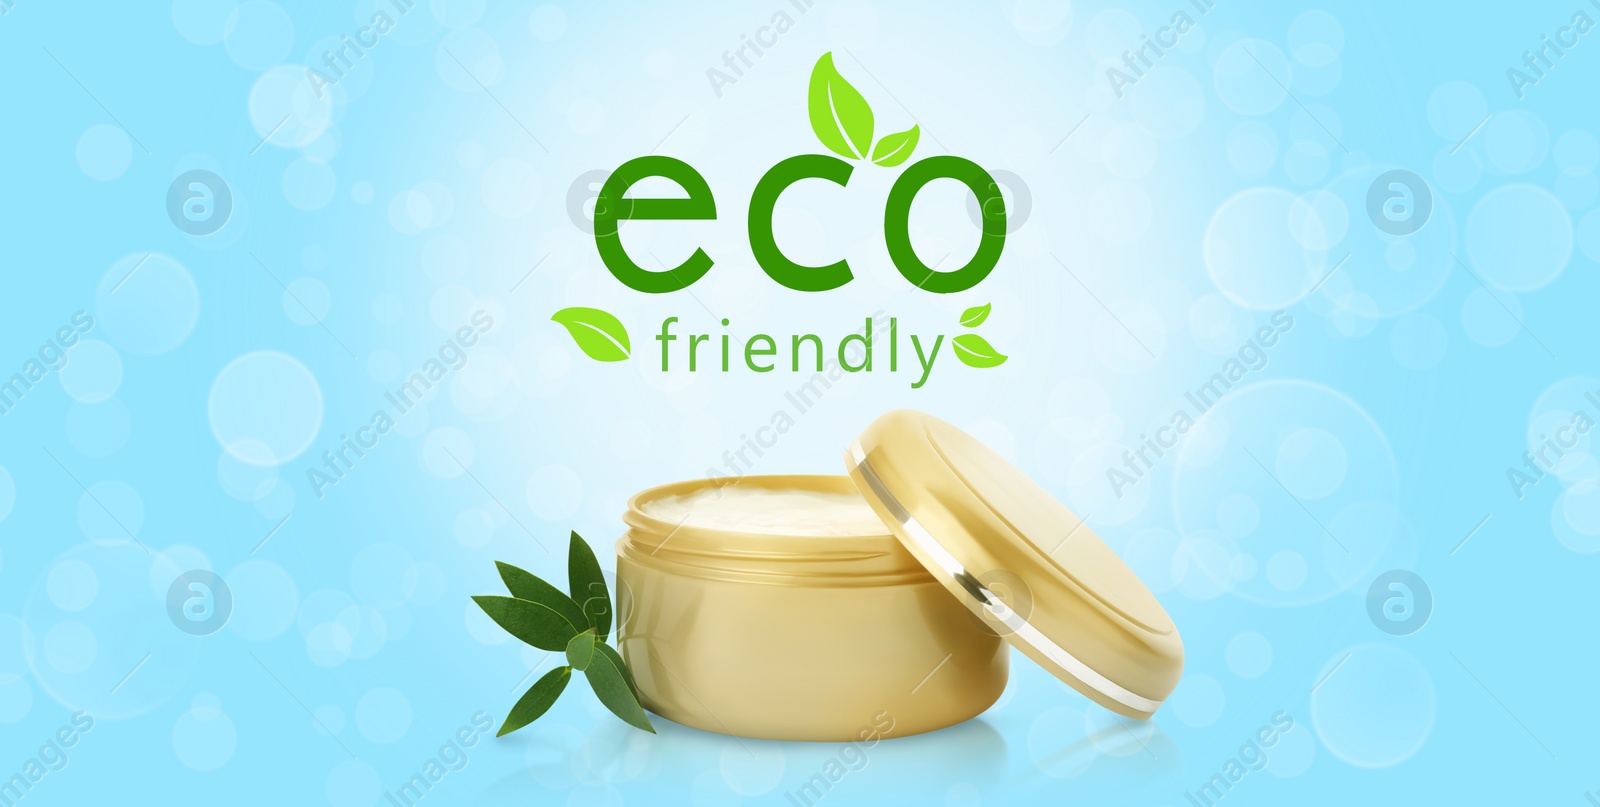 Image of Organic eco friendly cosmetic product on light blue background, banner design